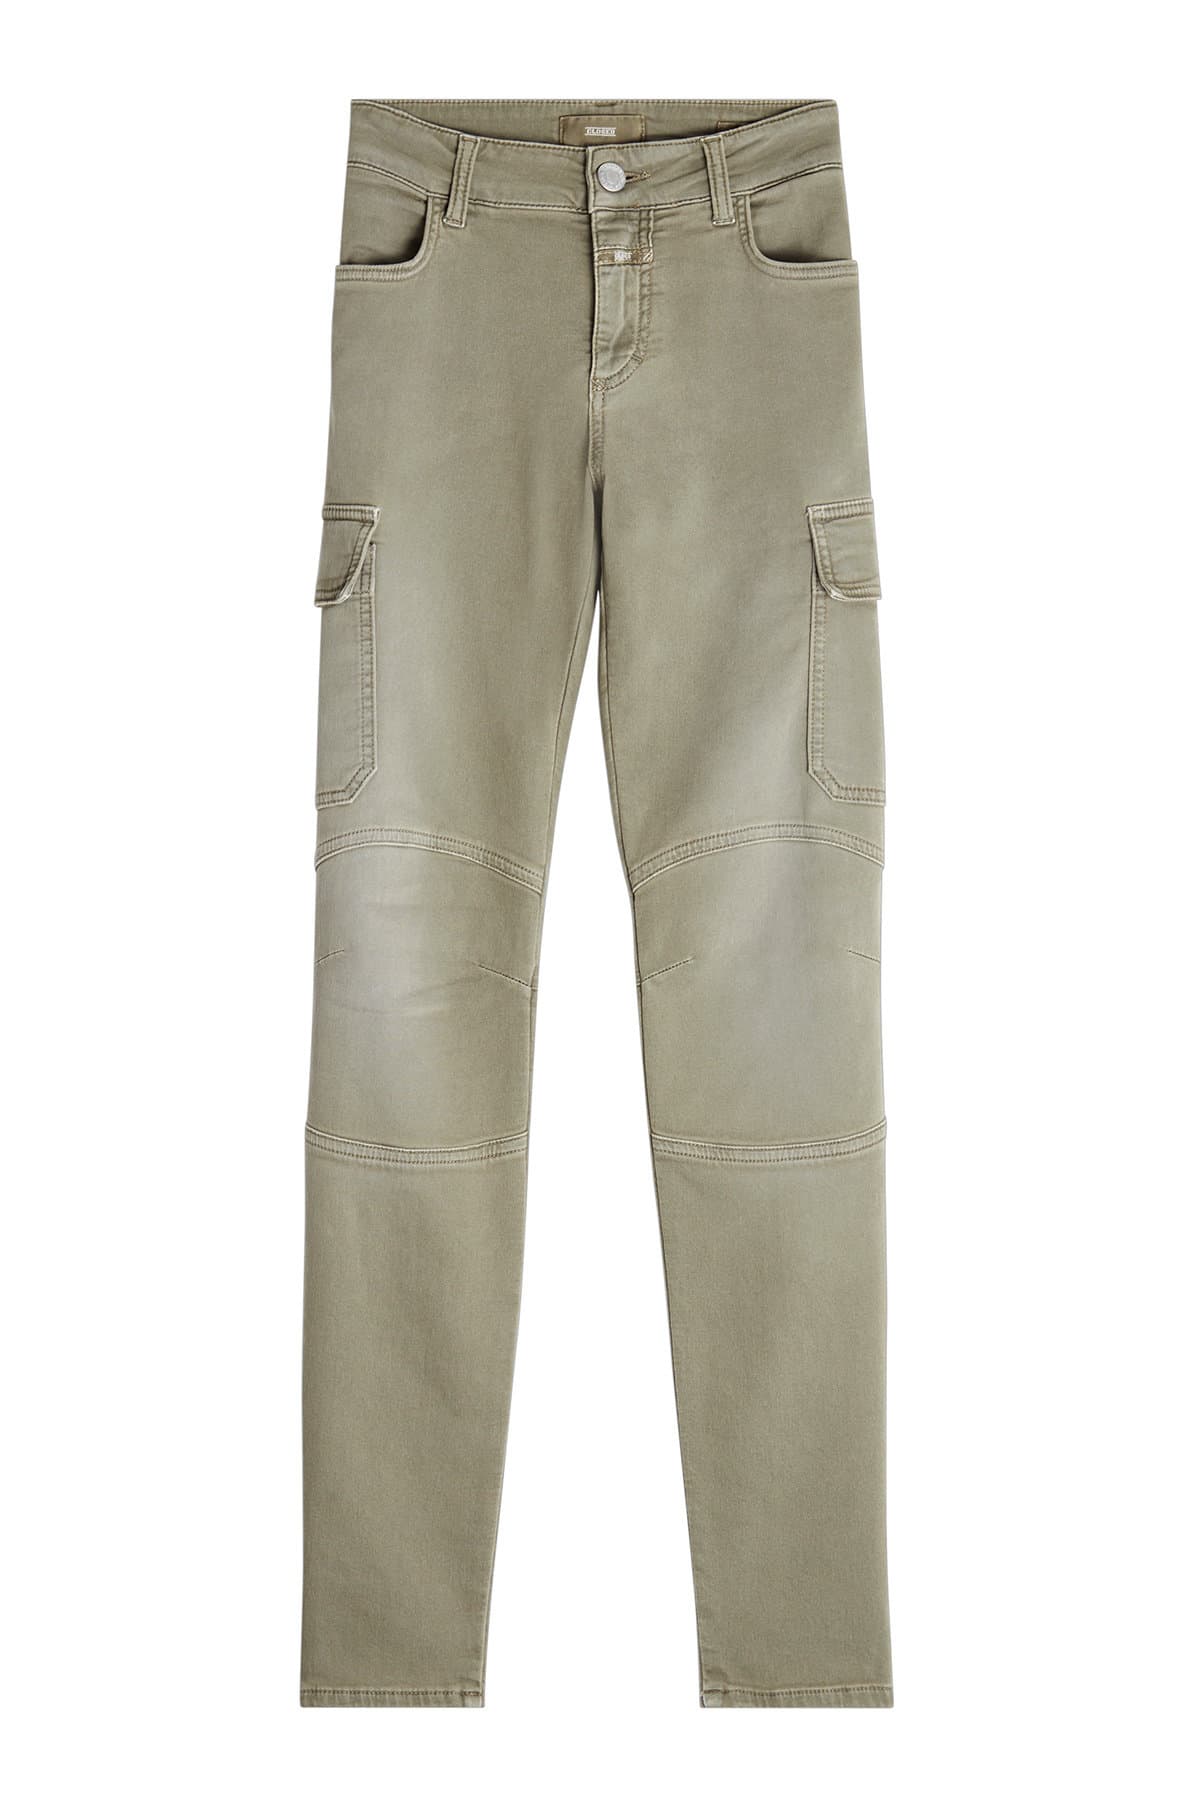 Closed - Robyn Cotton Cargo Pants